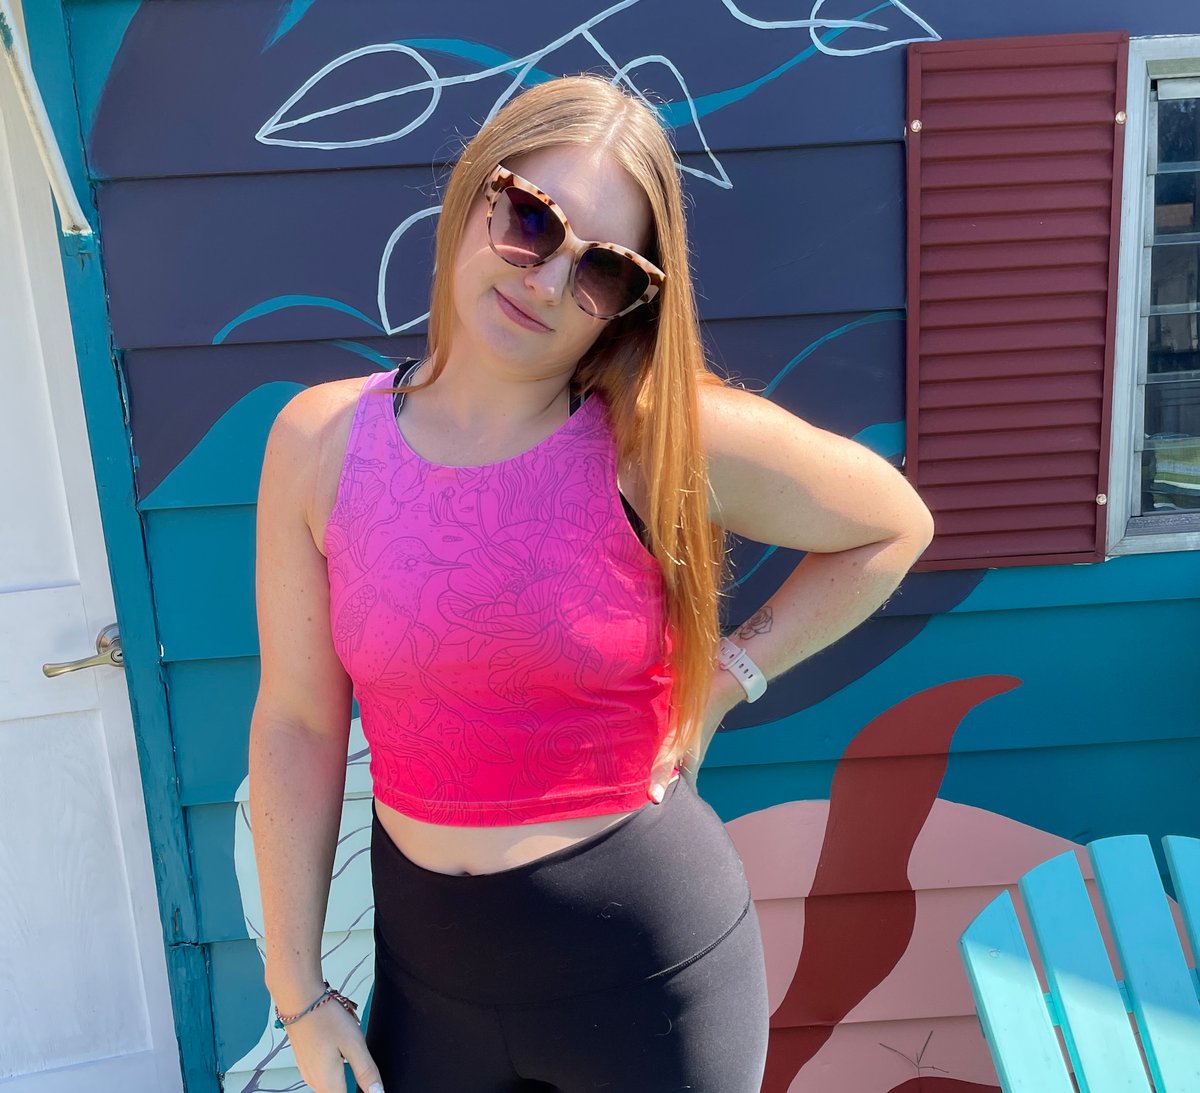 Image of :Pink: Midnight in the Garden of Good & Evil Athletic Crop Top